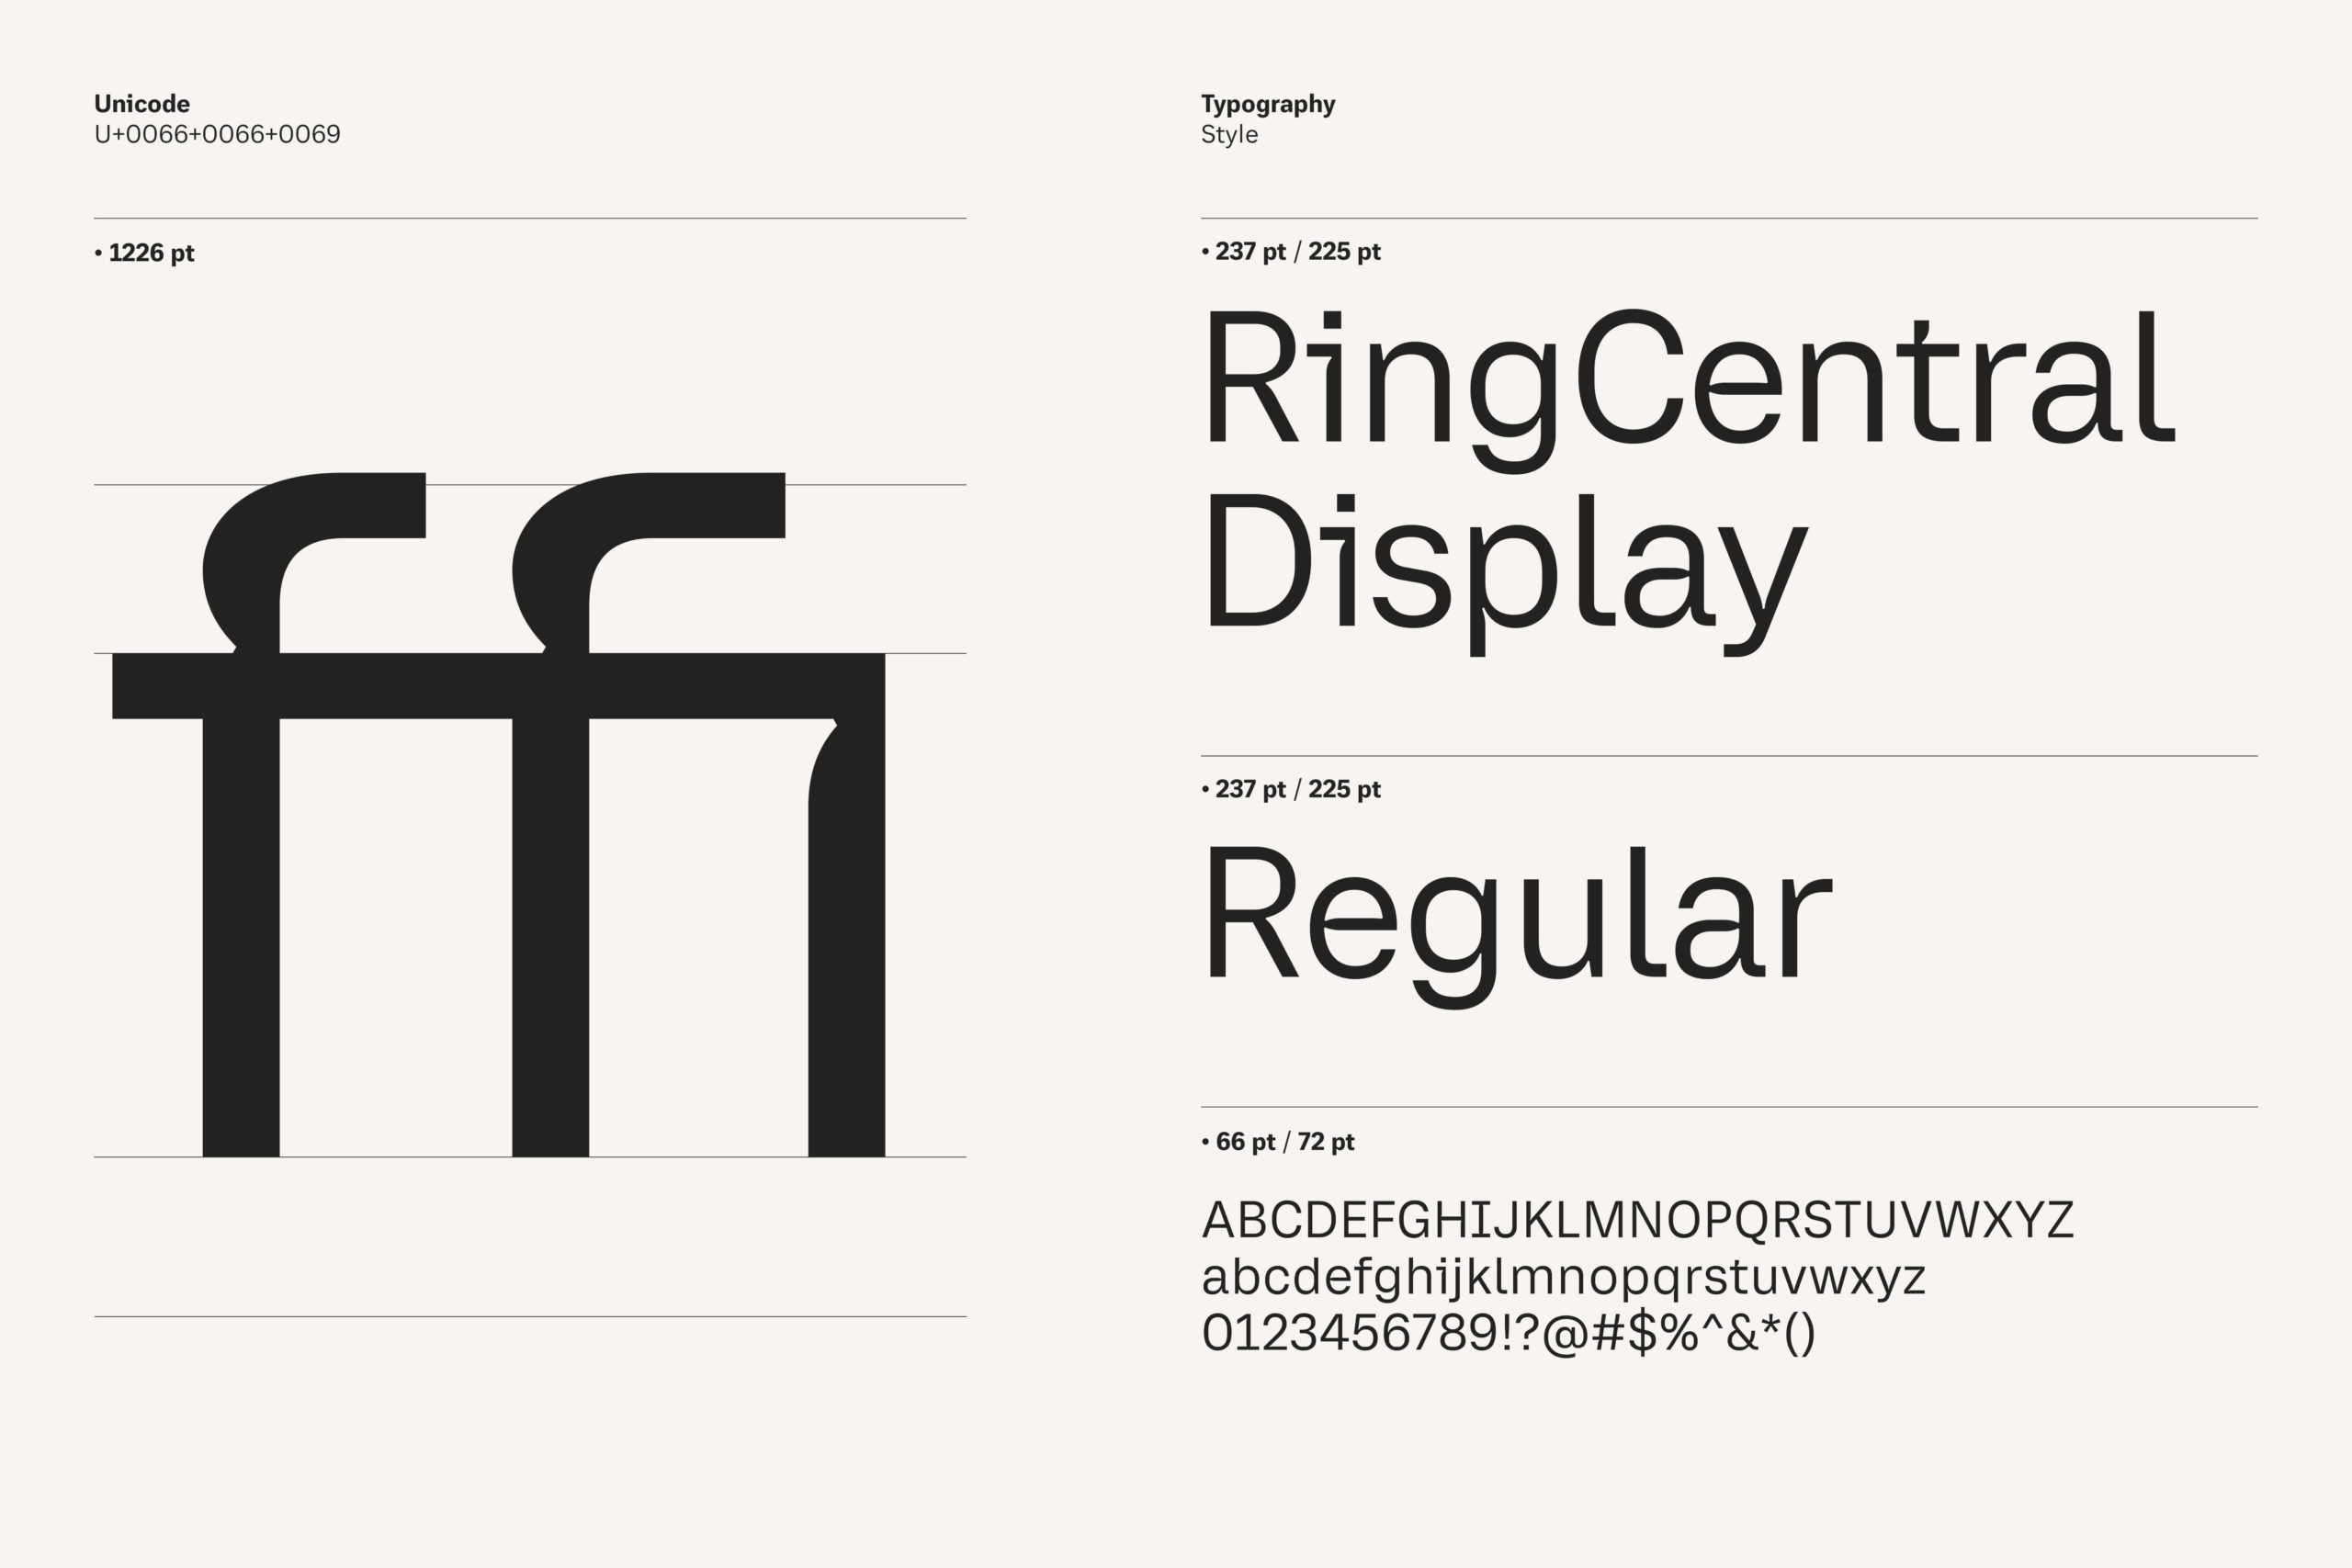 RingCentral Display_Typeface_0914227